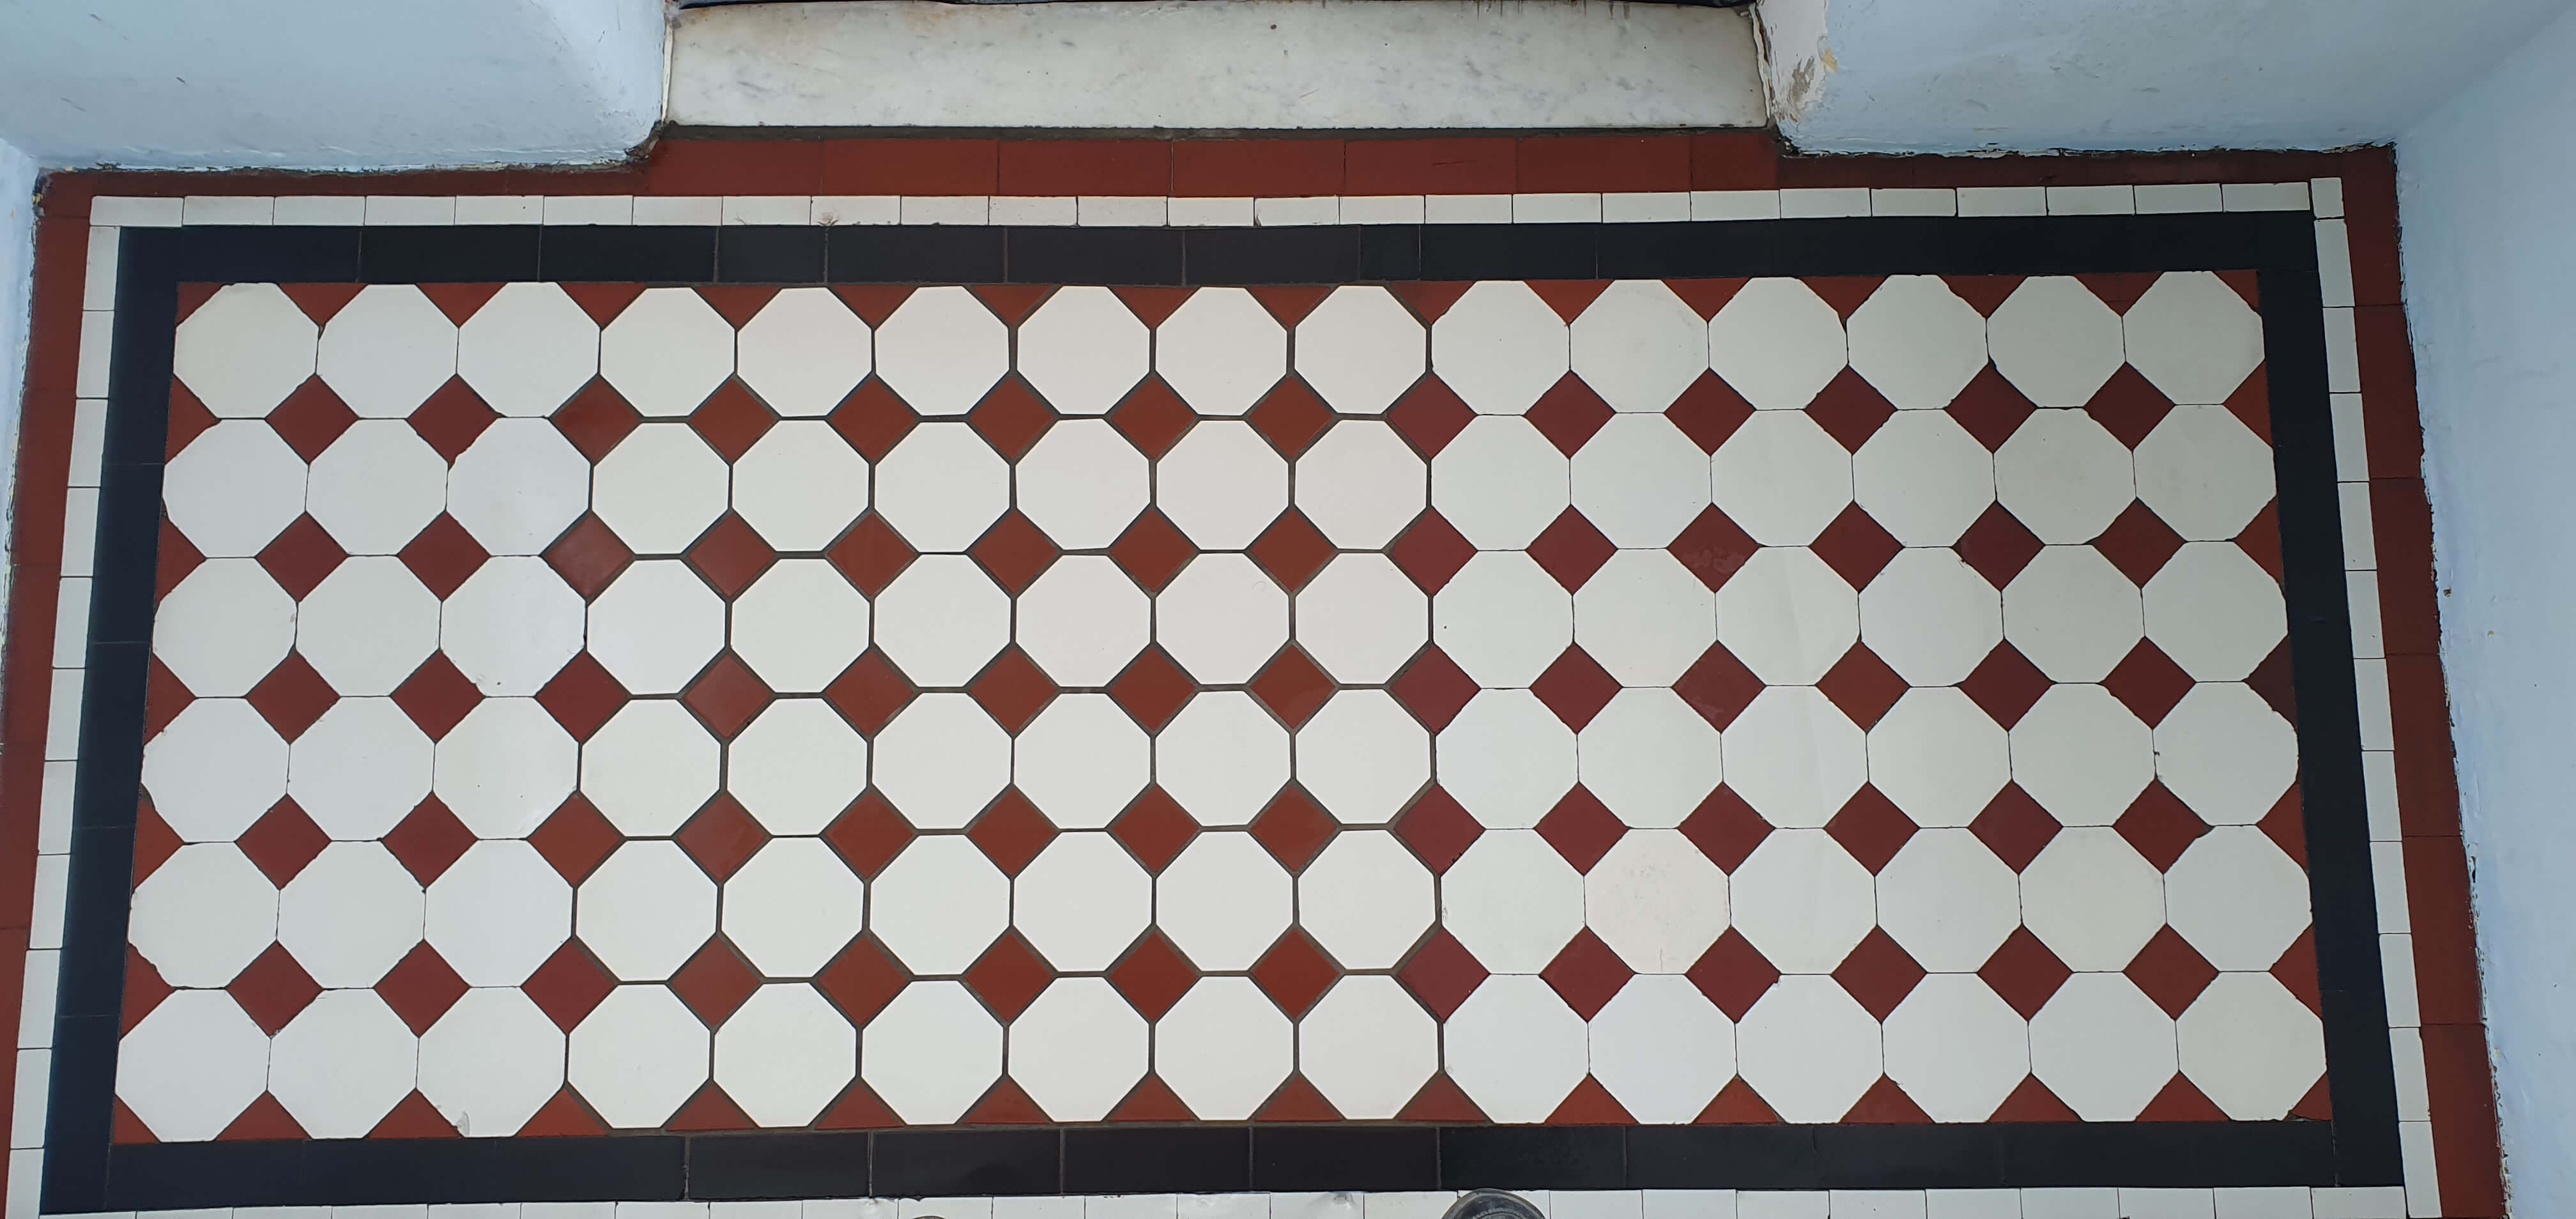 Can I restore Victorian tiles on my own